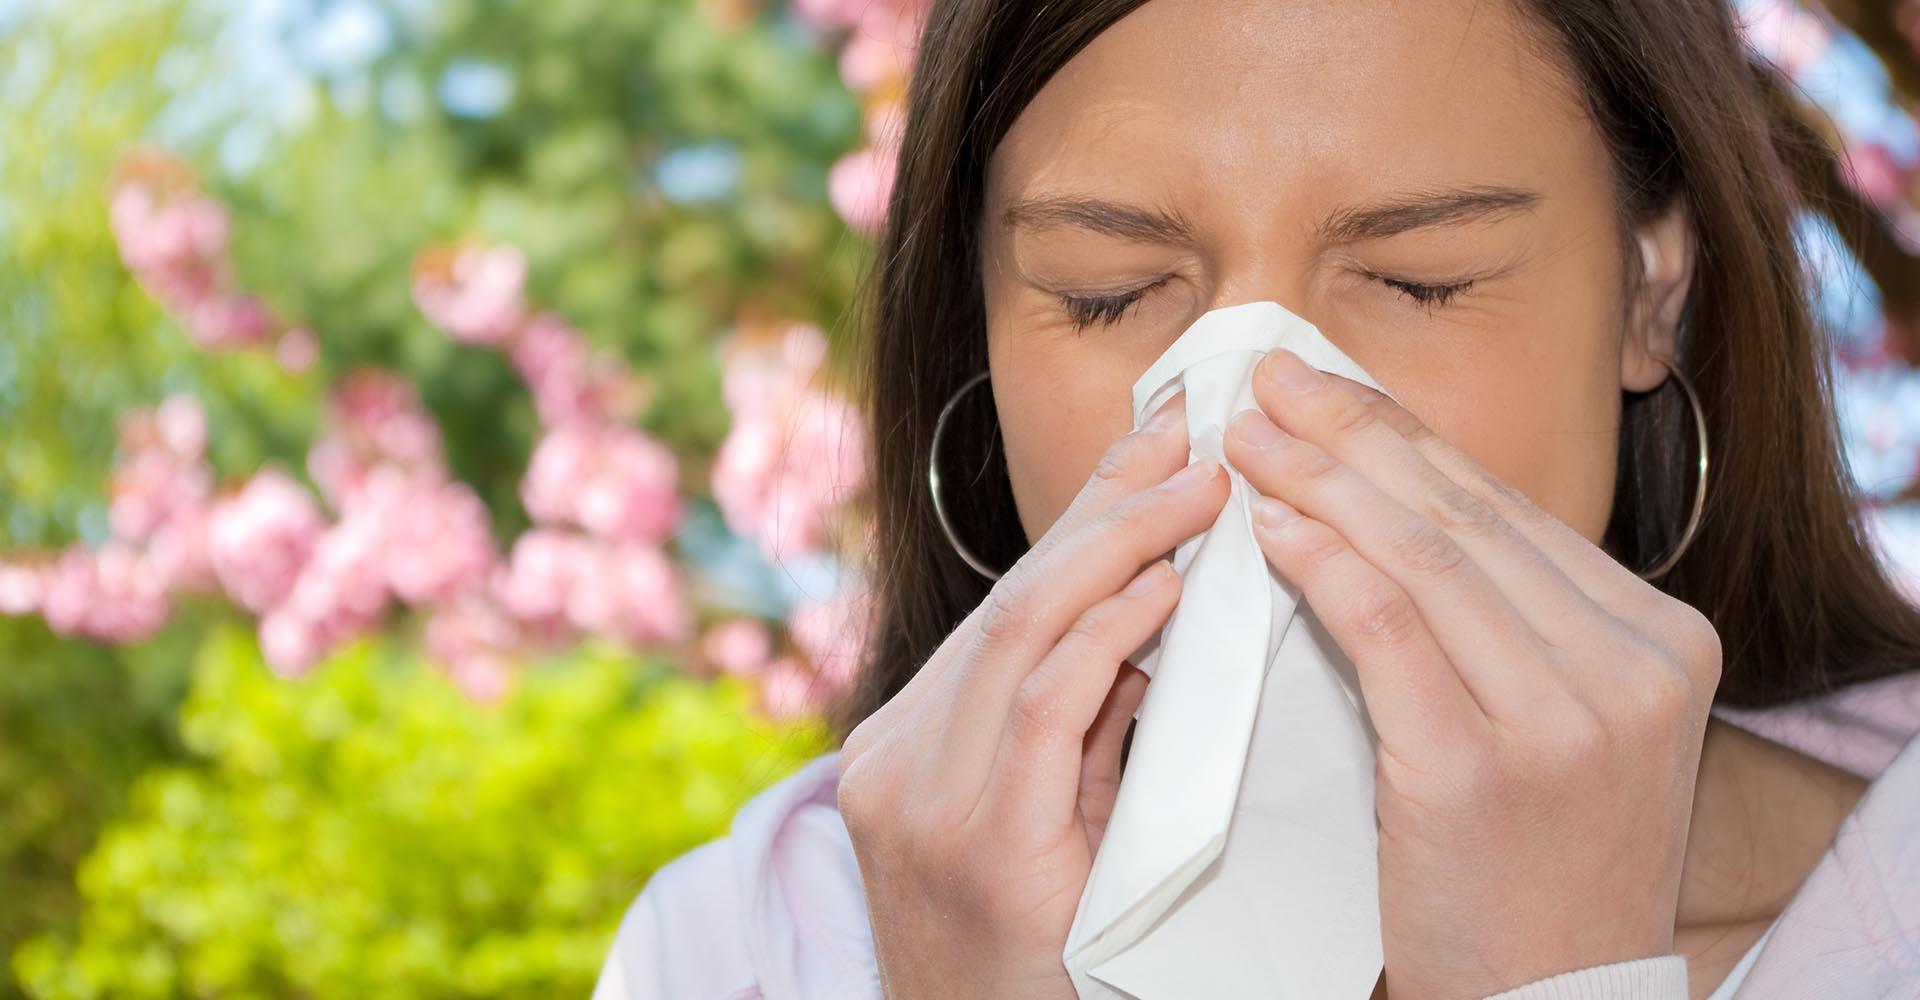 What are the Most Effective Allergy Treatments?